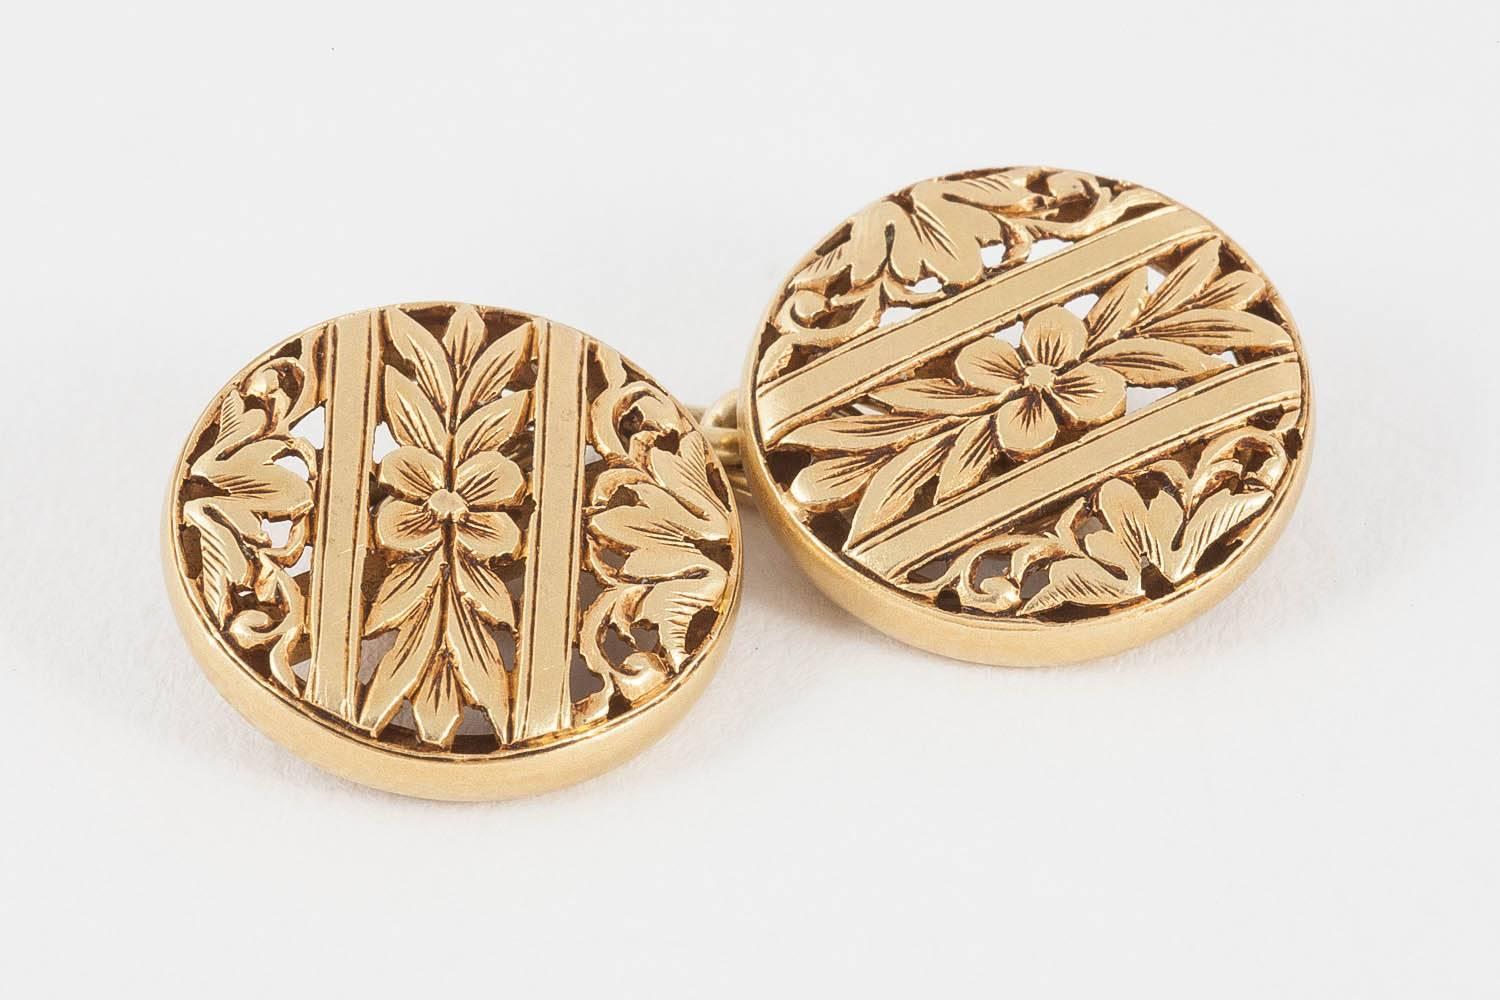 Cufflinks of Openwork Floral Design in 18 Karat Yellow Gold, French circa 1890 In Good Condition For Sale In London, GB